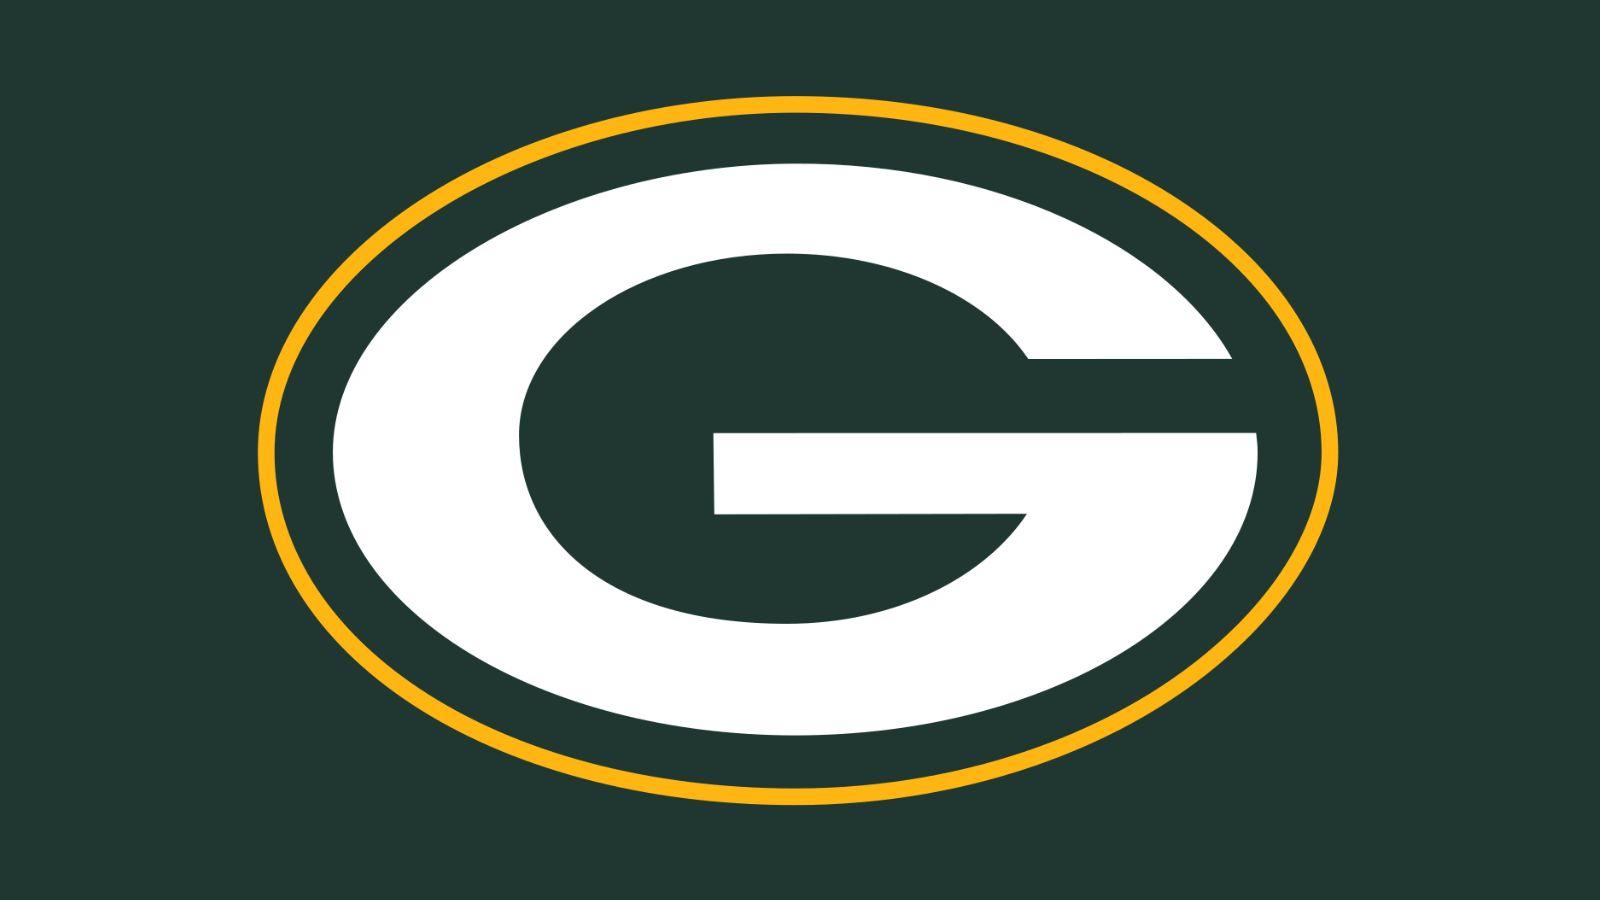 Green Bay Packers donate CPR materials to schools